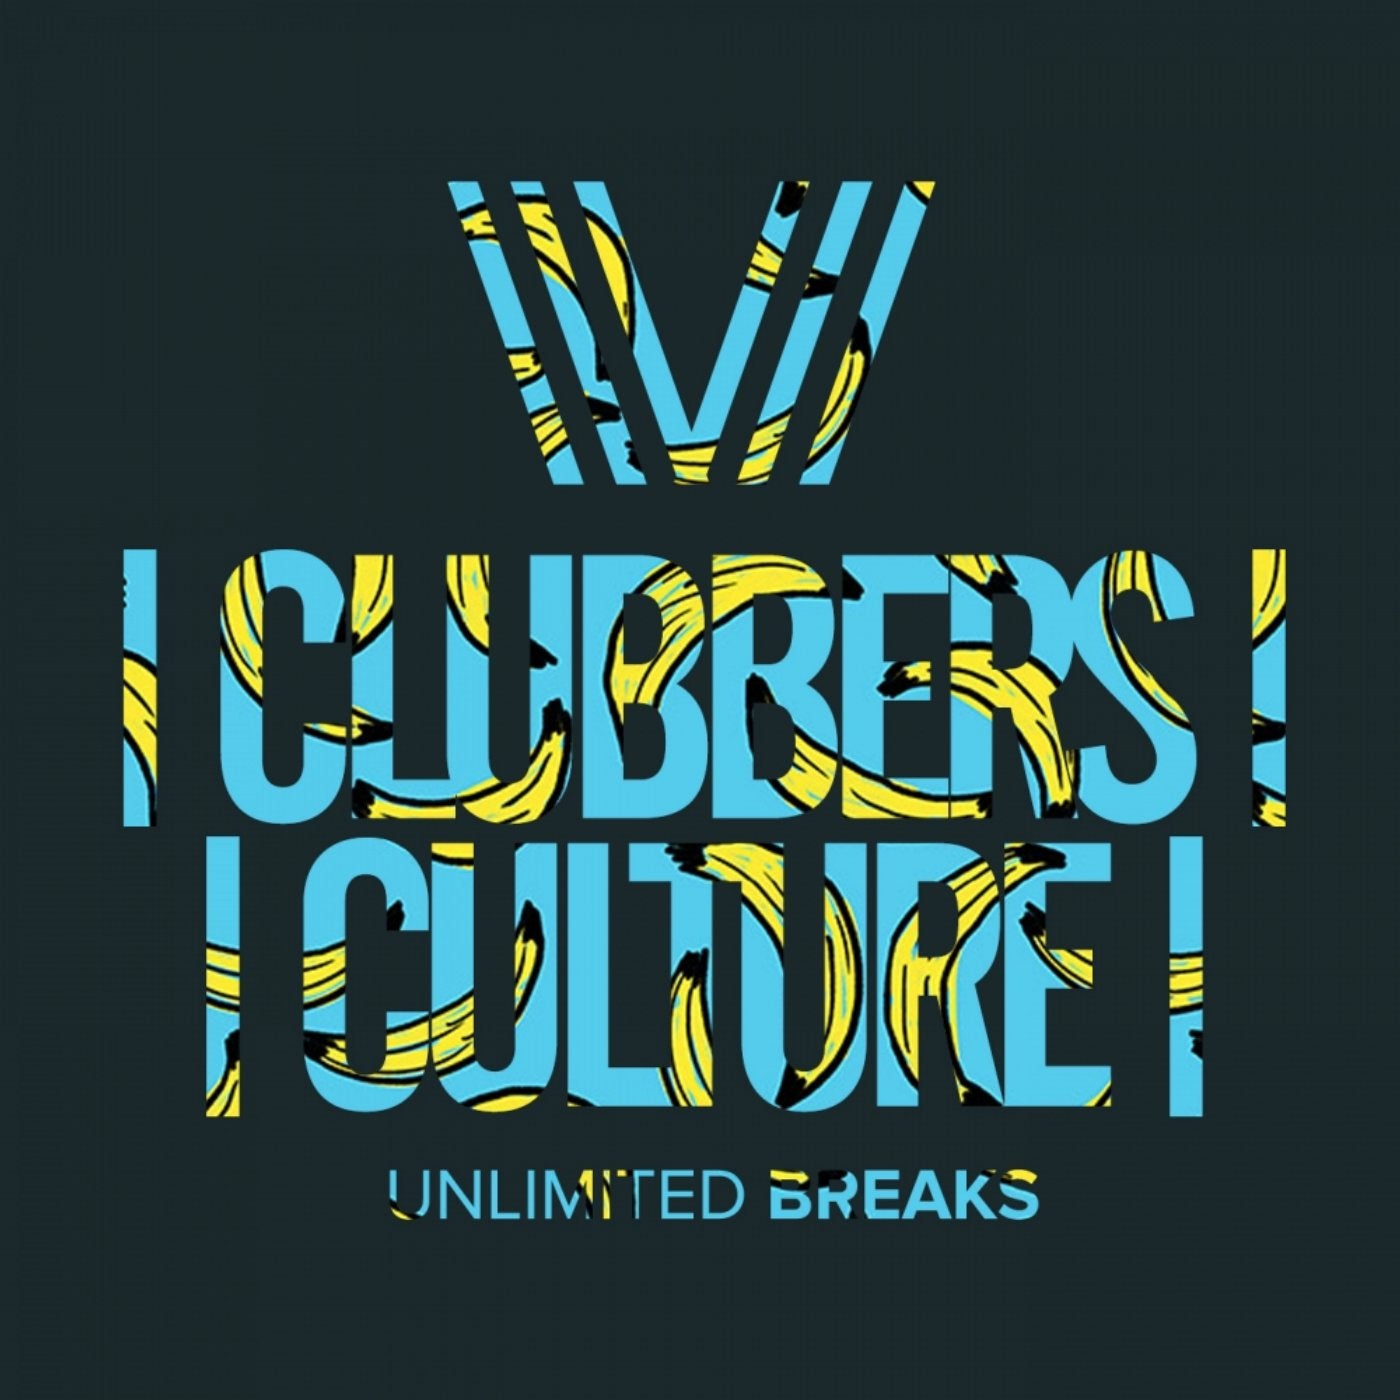 Clubbers Culture: Unlimited Breaks